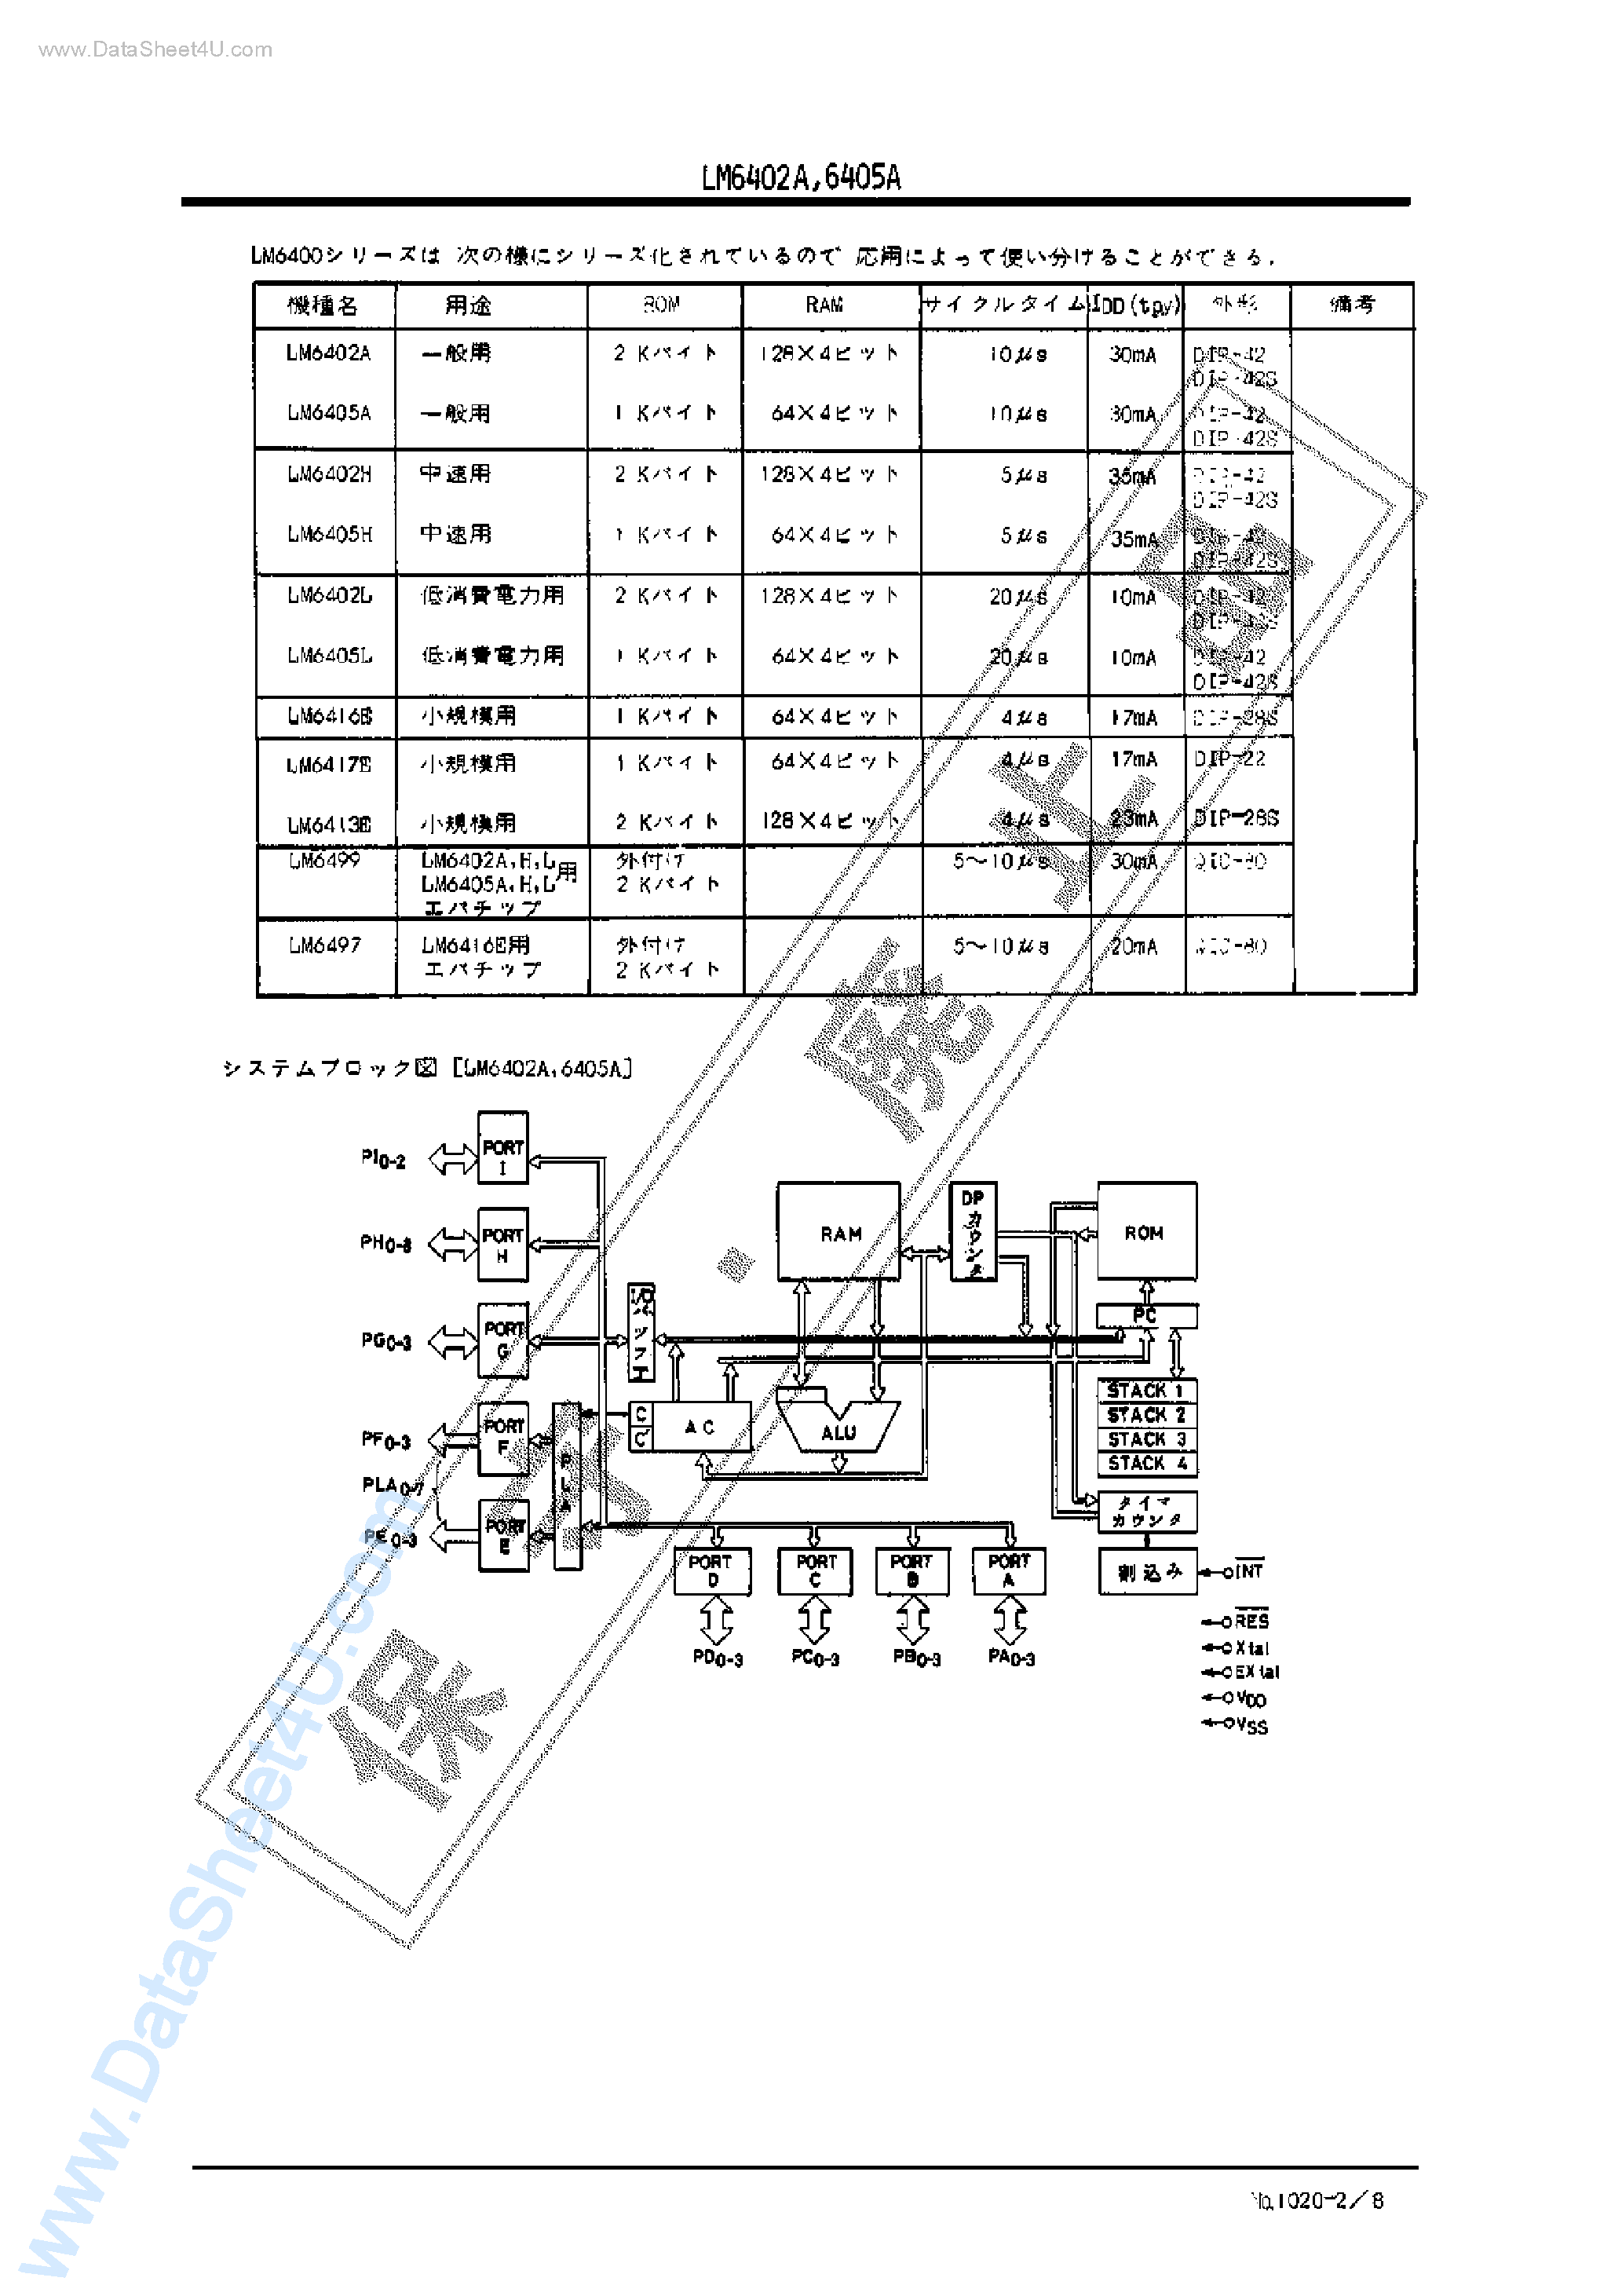 Datasheet LM6402A - (LM6402A / LM6405A) E/D MOS LSI page 2